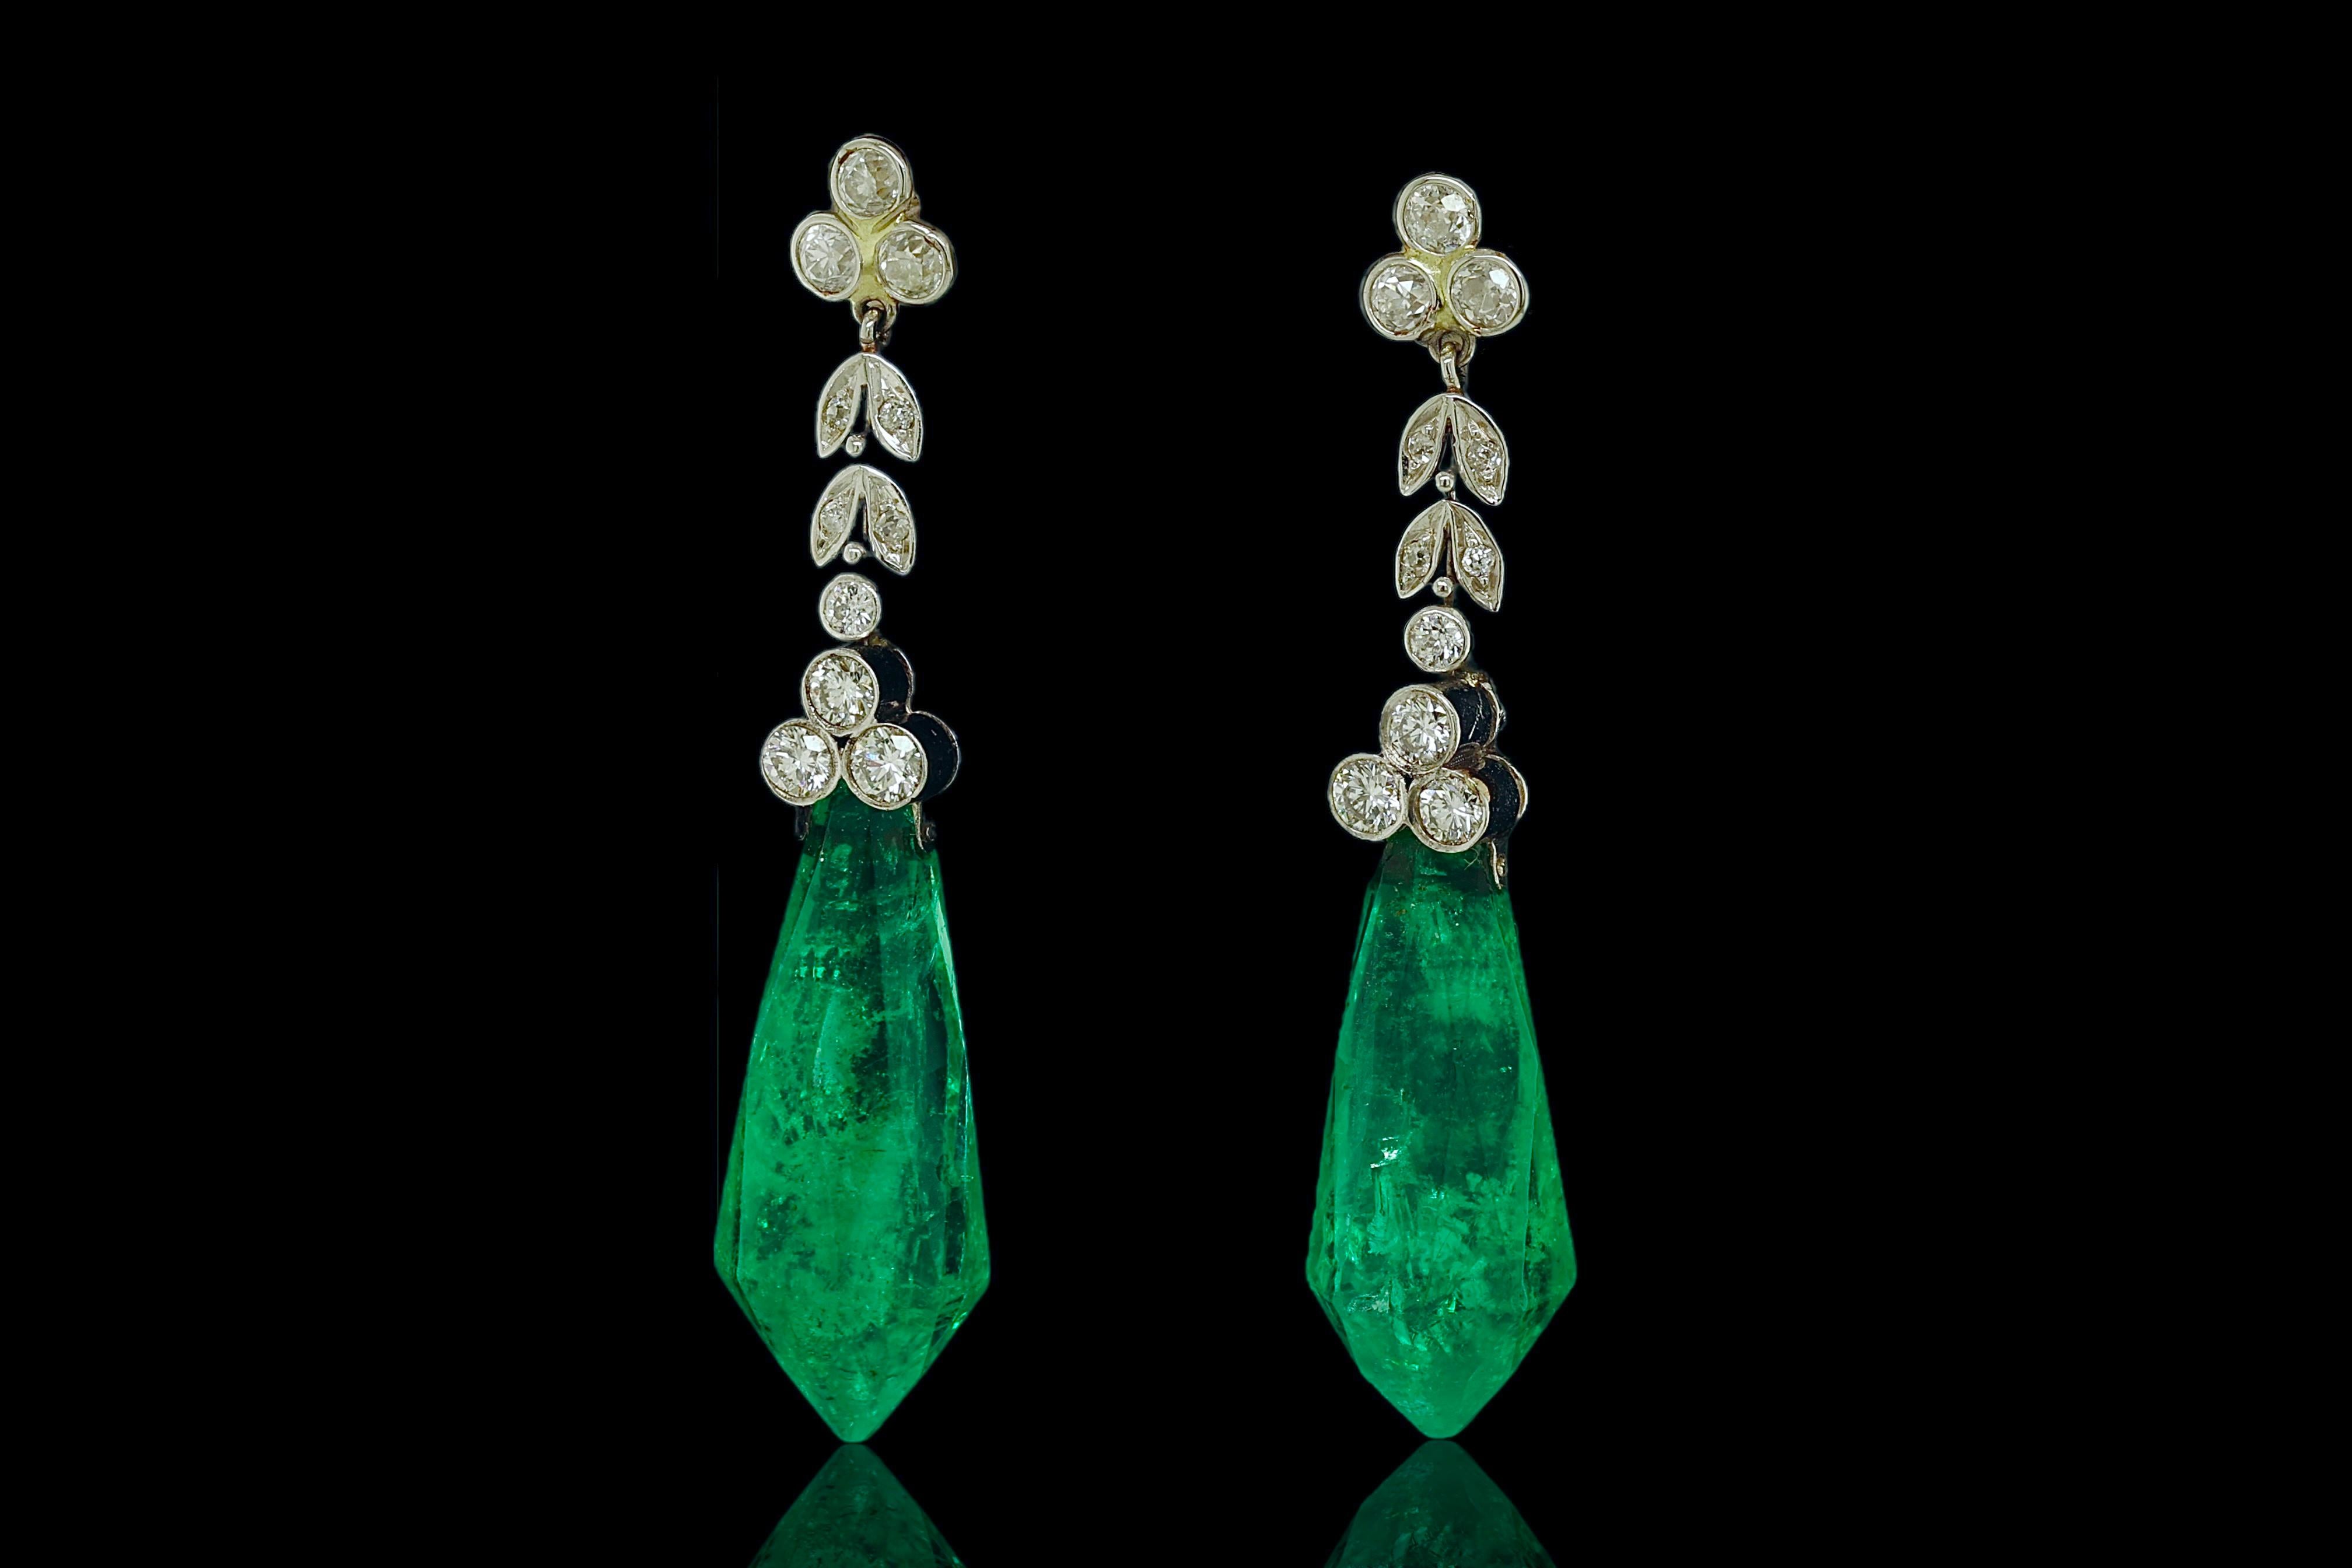 18kt White Gold Dangling Earrings with 32ct Emeralds and 1.46ct Diamonds, Estate In Excellent Condition For Sale In Antwerp, BE